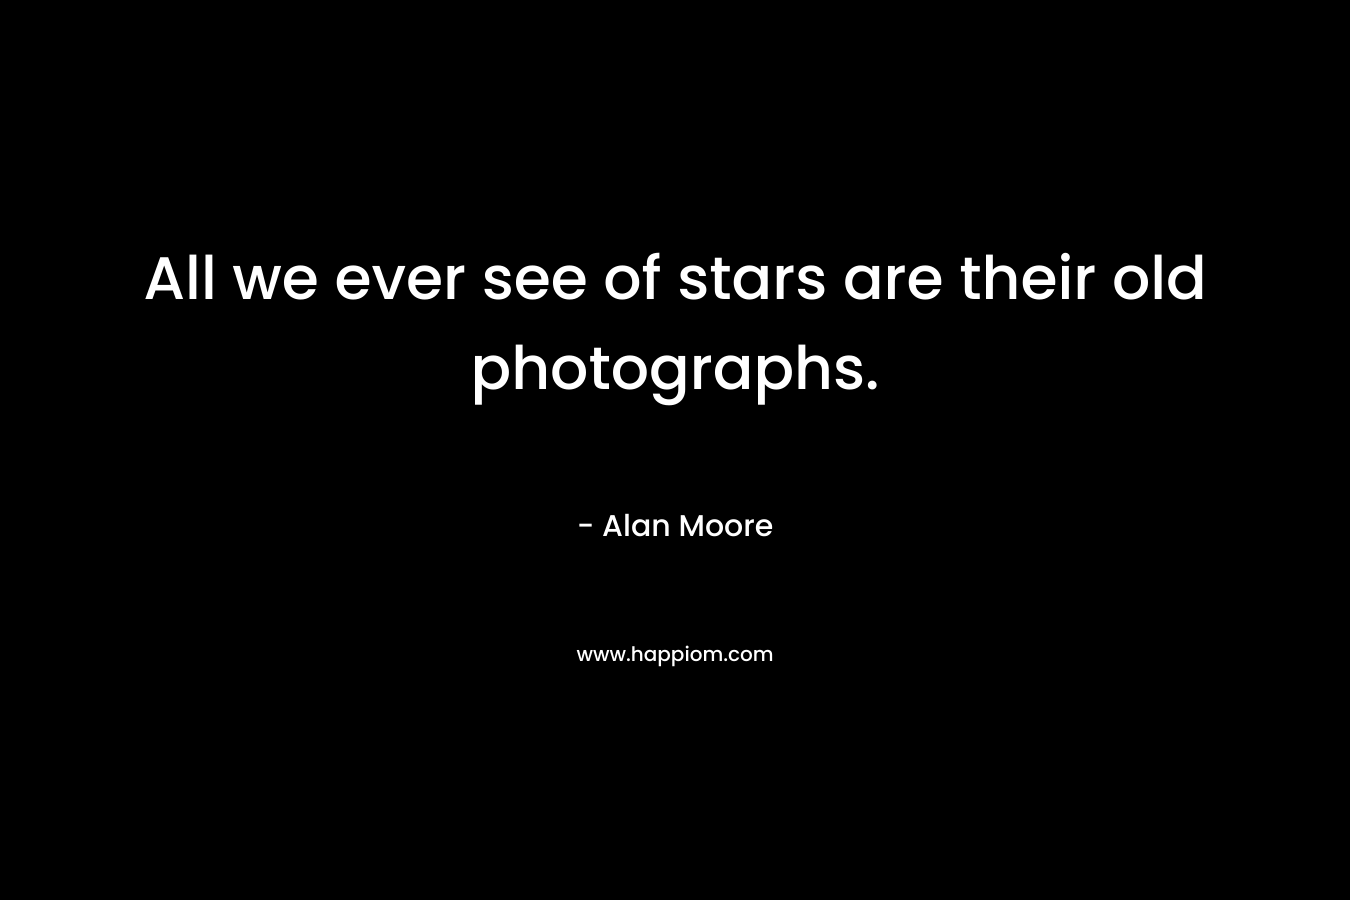 All we ever see of stars are their old photographs. – Alan Moore